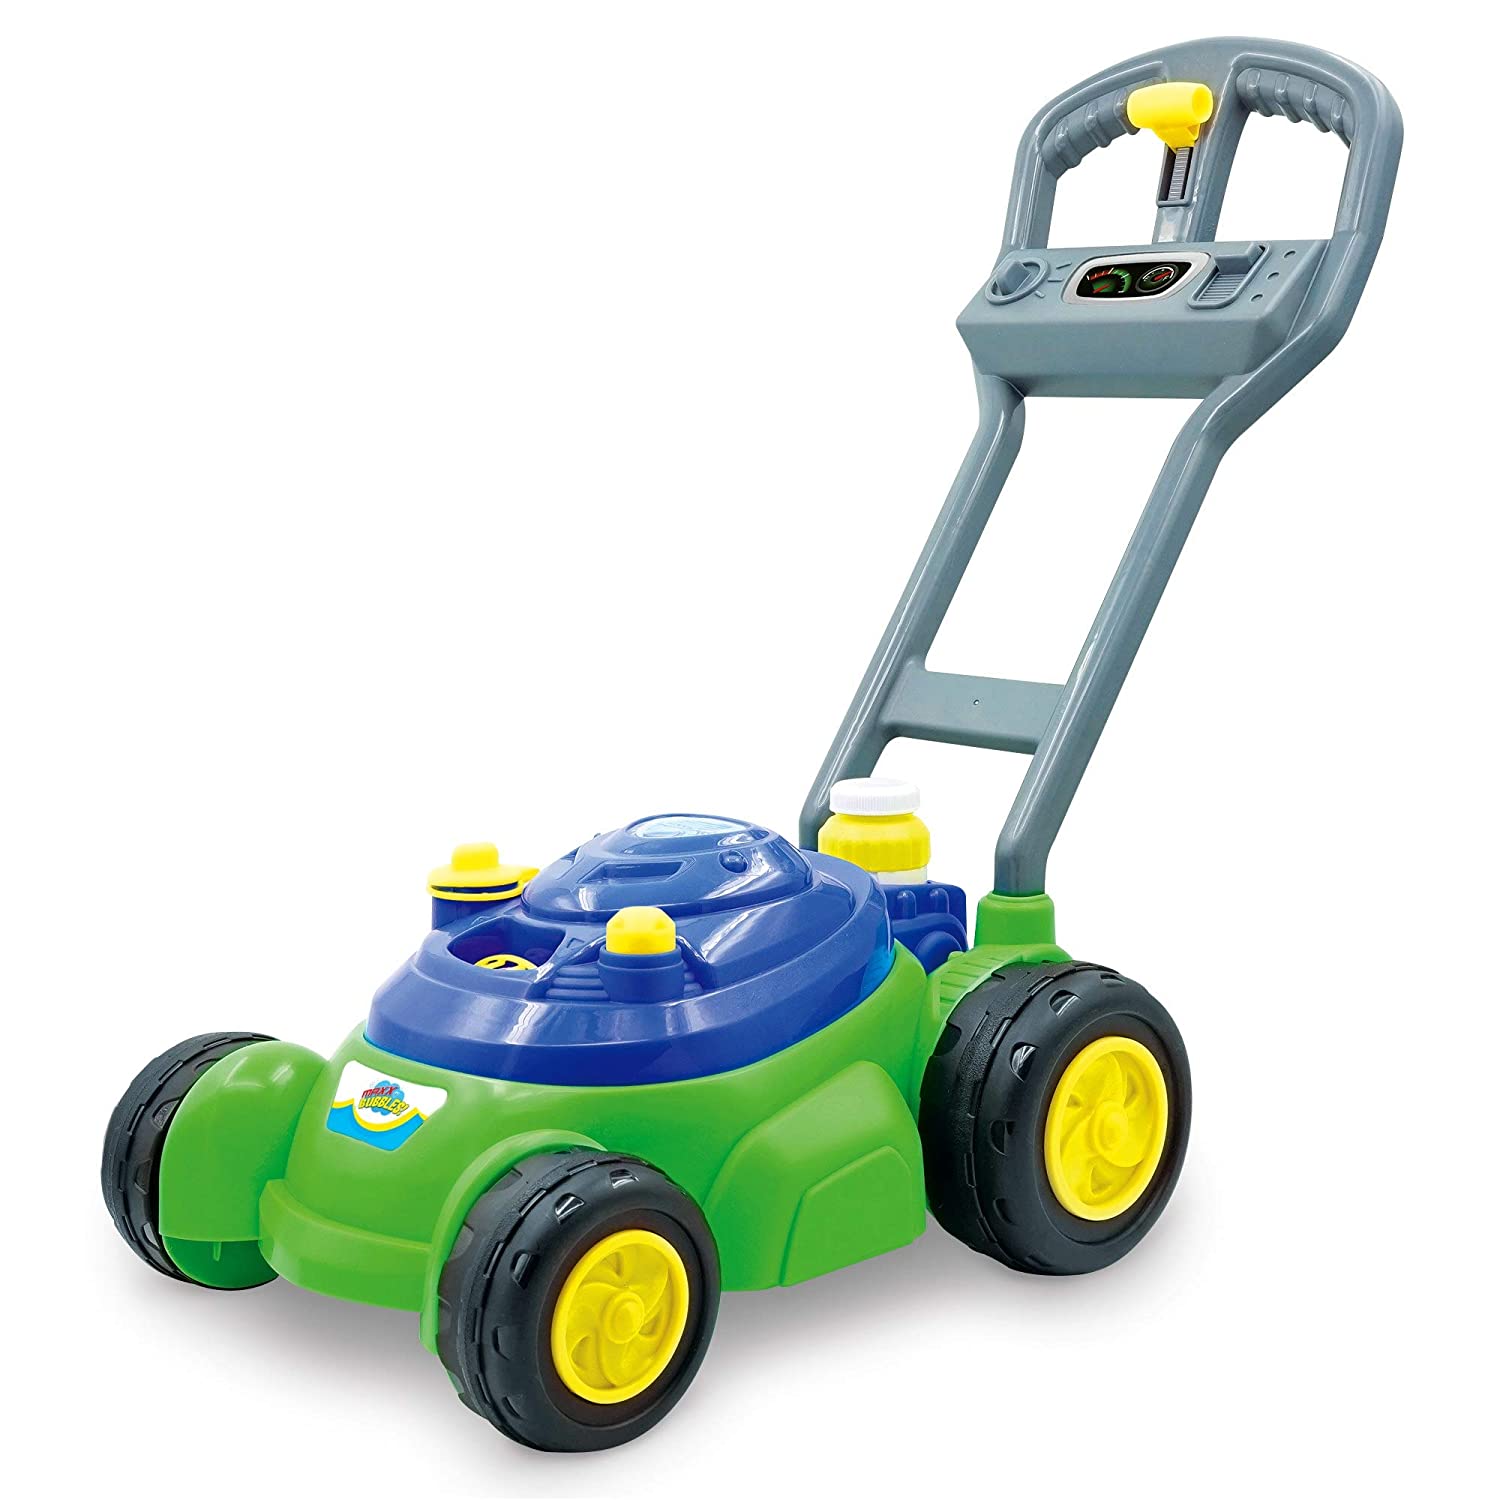 9 Best Bubble Lawn Mower for Kids & Toddlers 2023 - Reviews 2